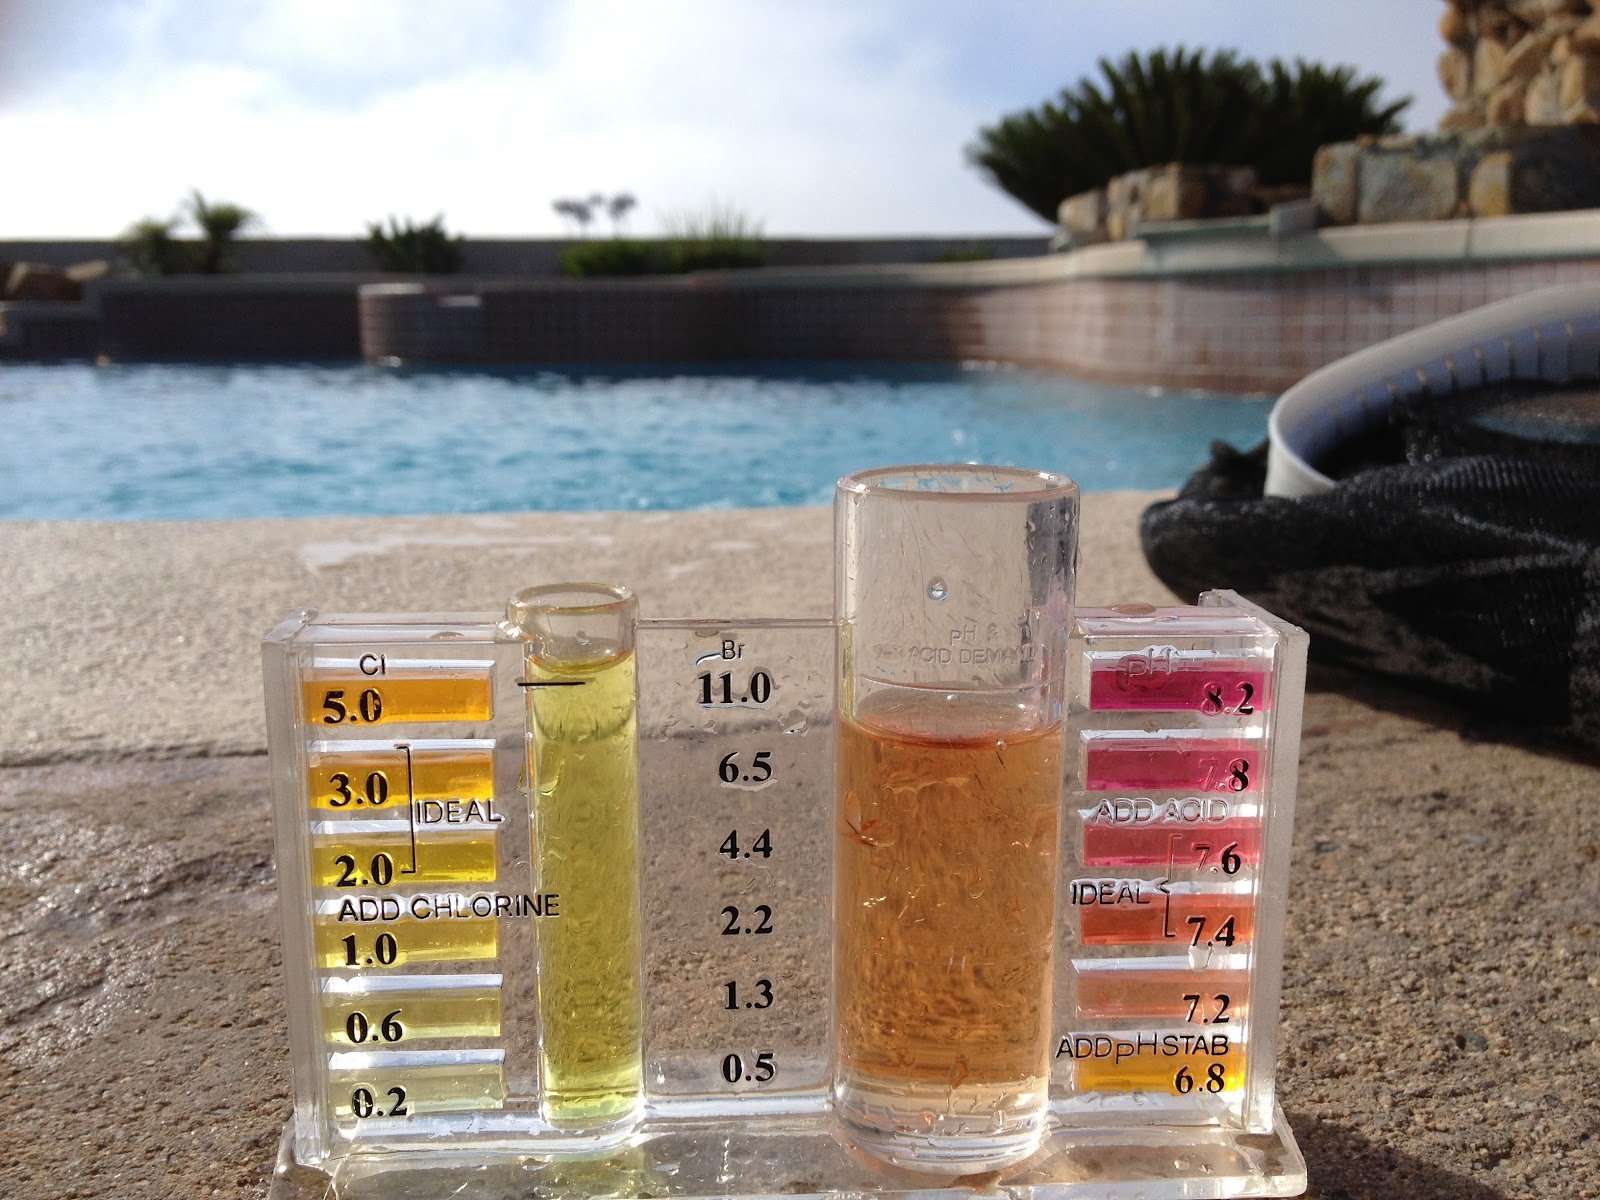 Wine Country Pools And Supplies: How To Check Pool Chemicals